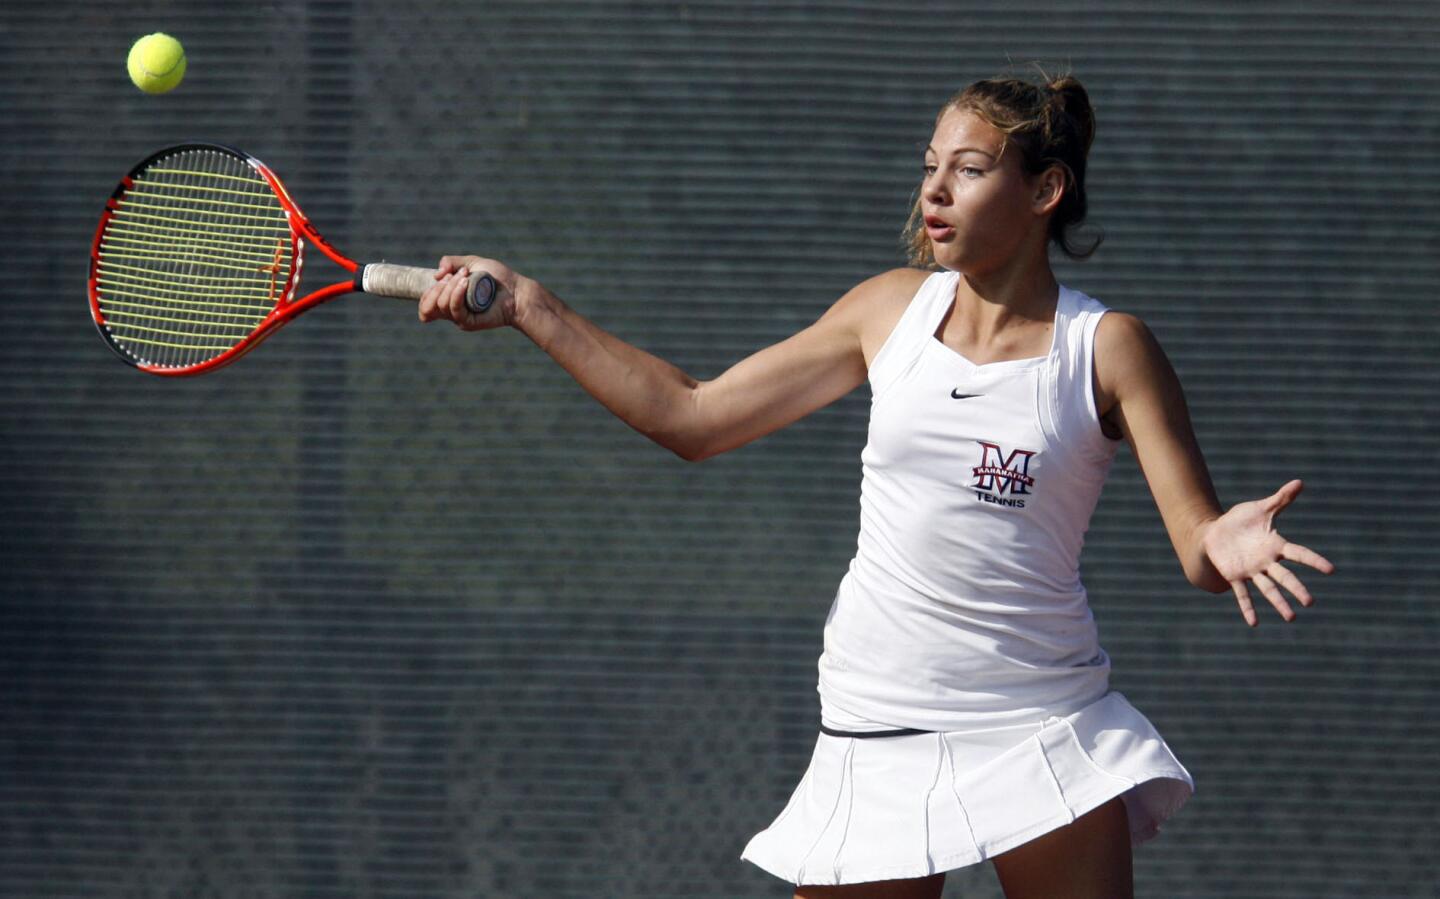 Maranatha's Hailey McNall swings at the ball during a singles match against North at Occidental College in Los Angeles on Friday, November 2, 2012.